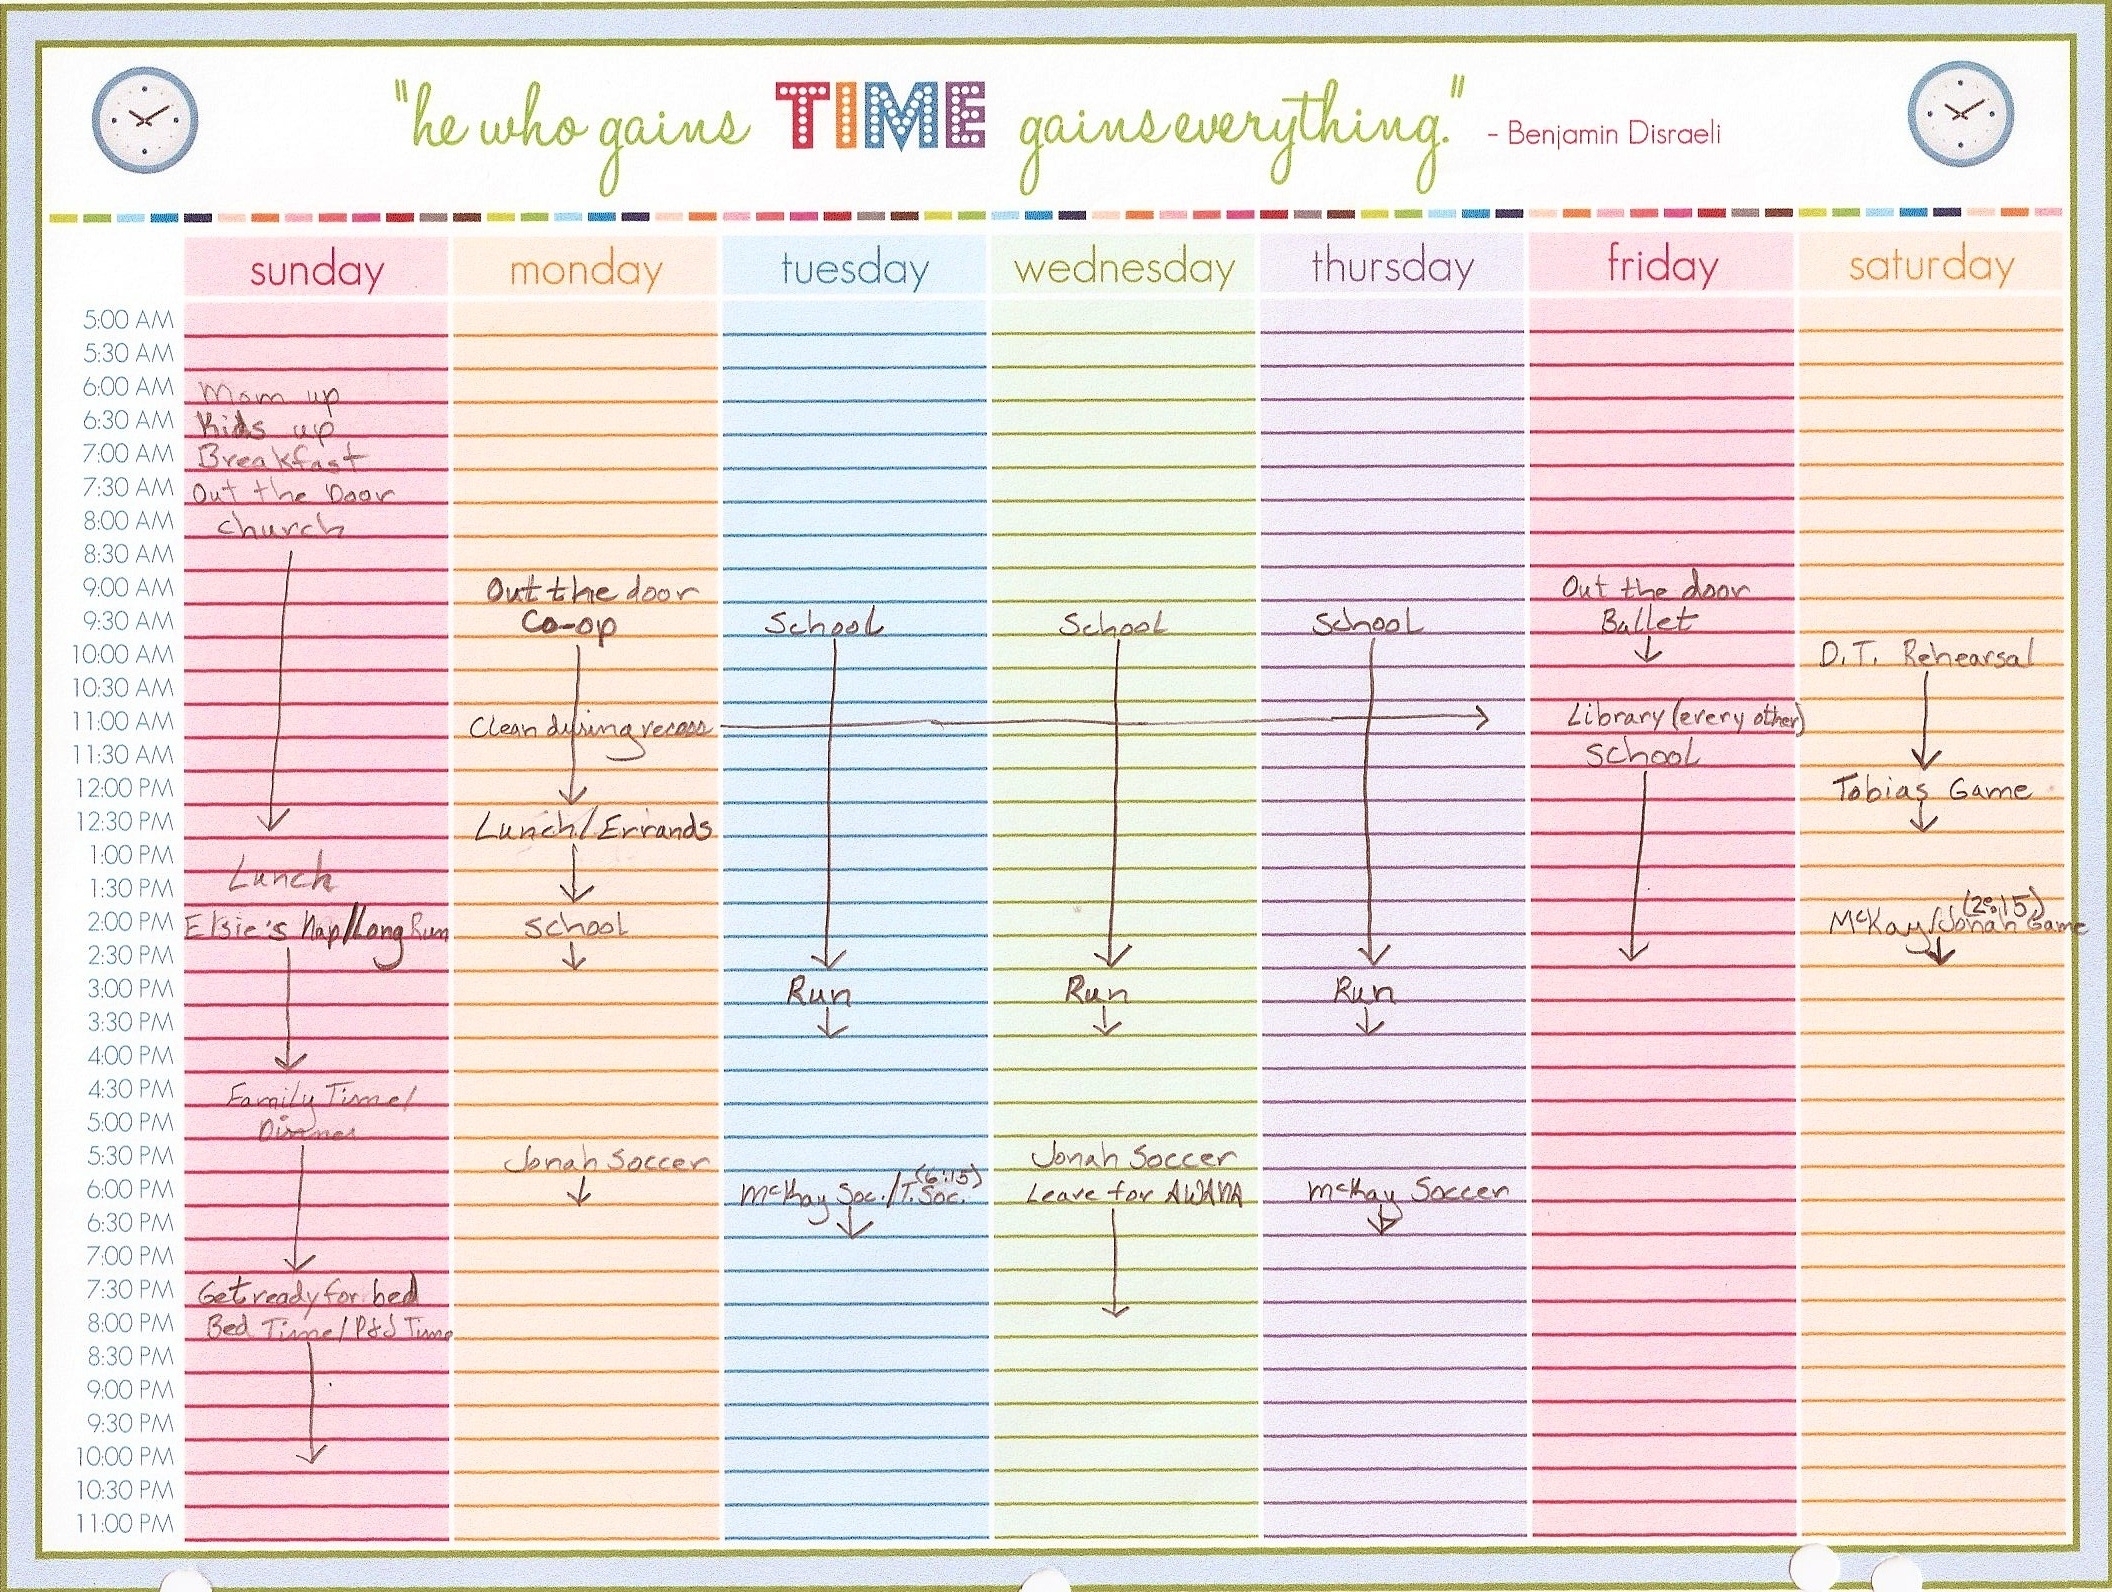 Monthly Calendar With Hourly Time Slots – Yearly Calendar Printable inside Monthly Calendar With Time Slots